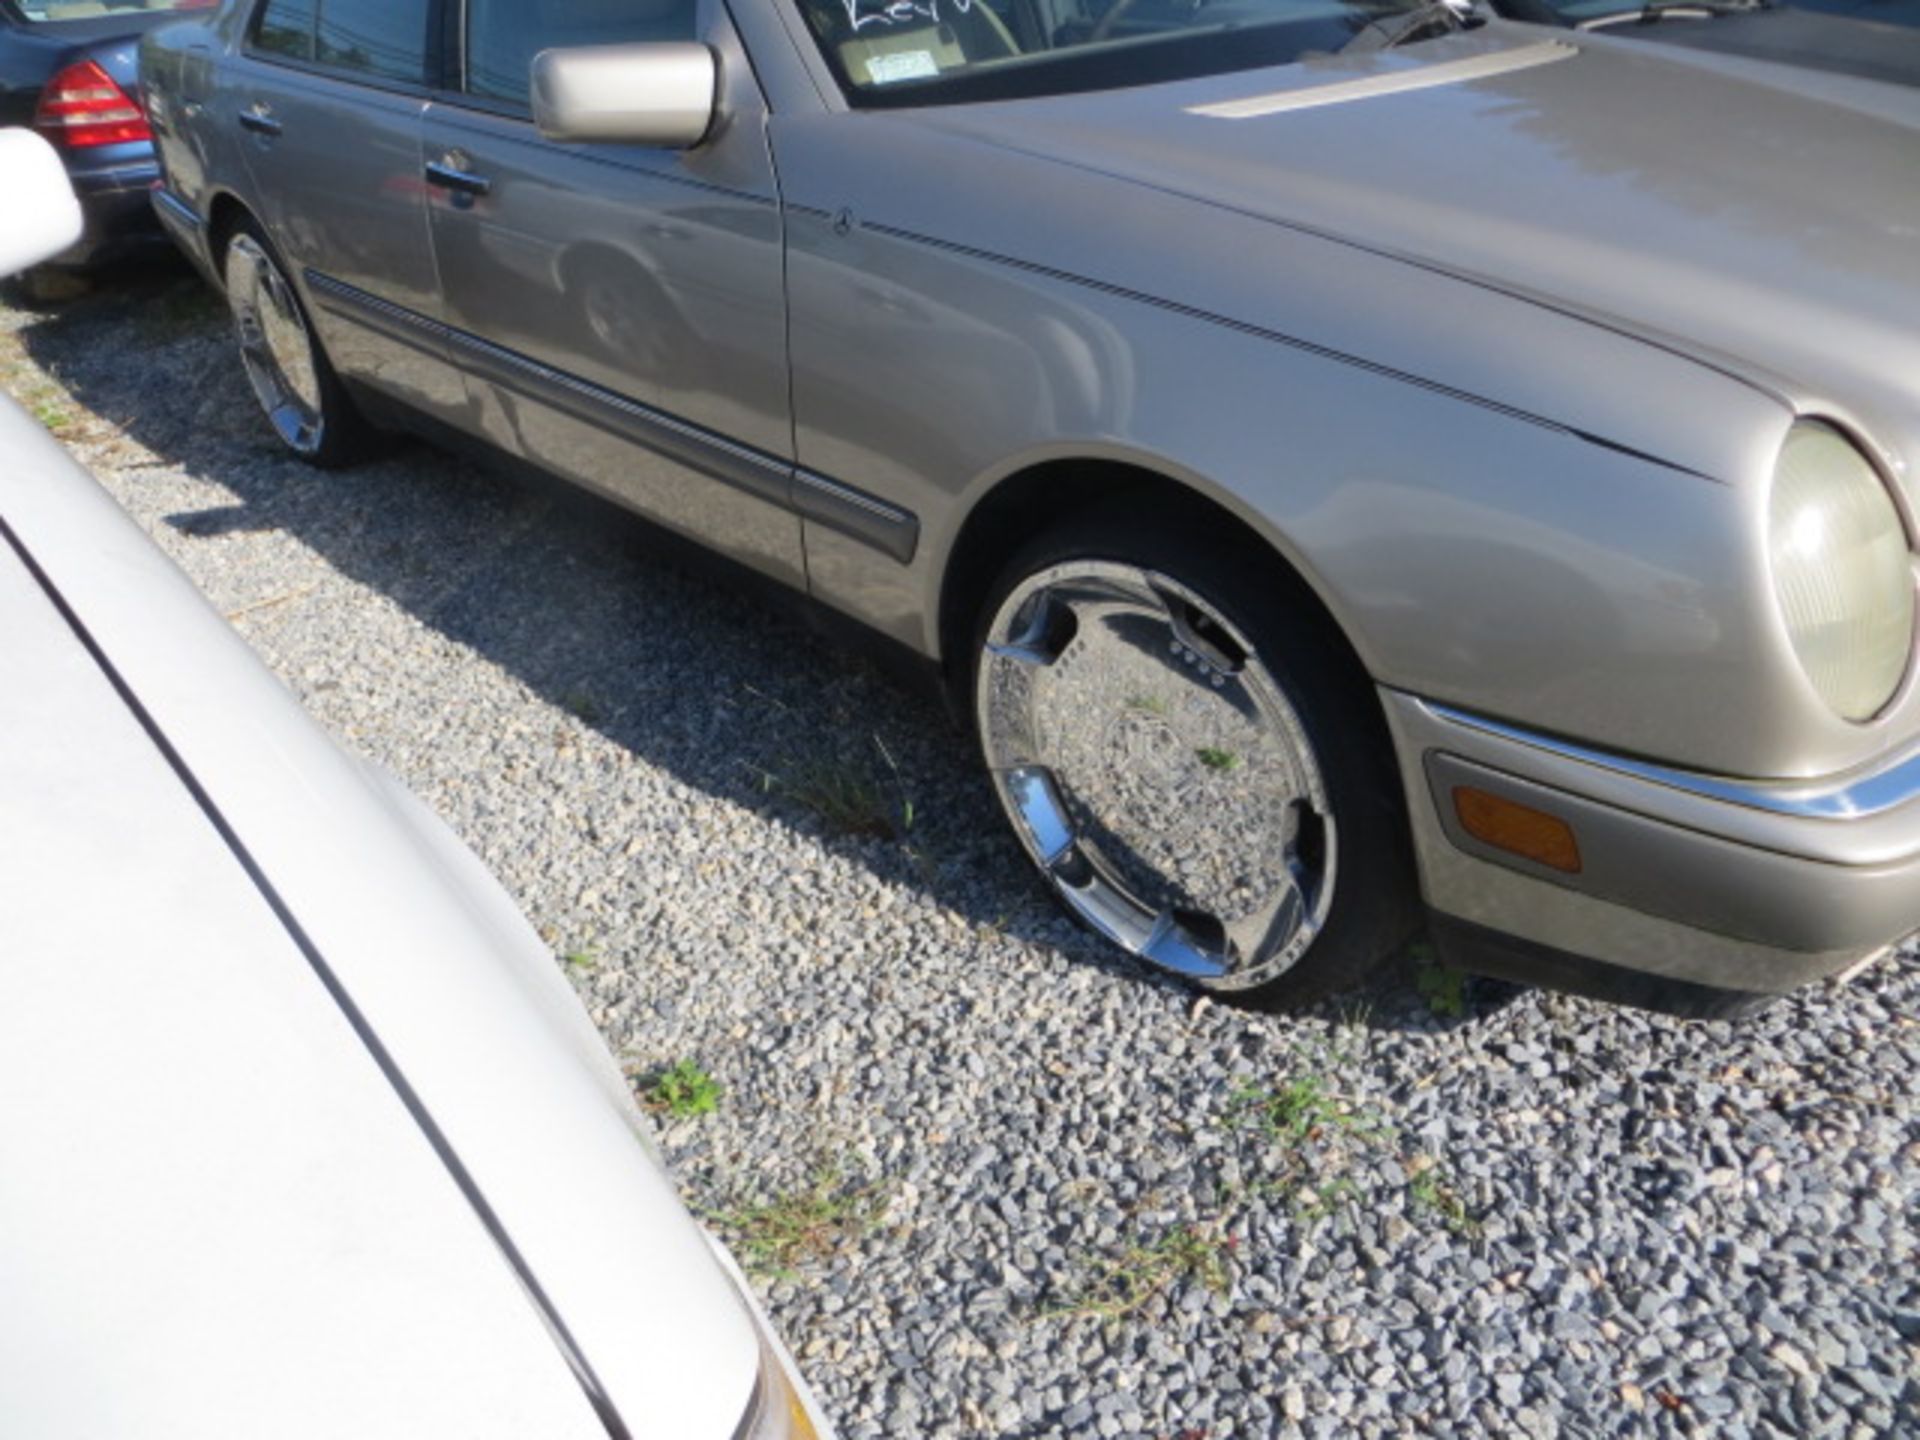 1997 Mercedes Benz E420-NEEDS HEATER HOSE 189000 MILES,VIN WDBJF72F8VA305016, SOLD WITH GOOD TRANSFE - Image 4 of 4